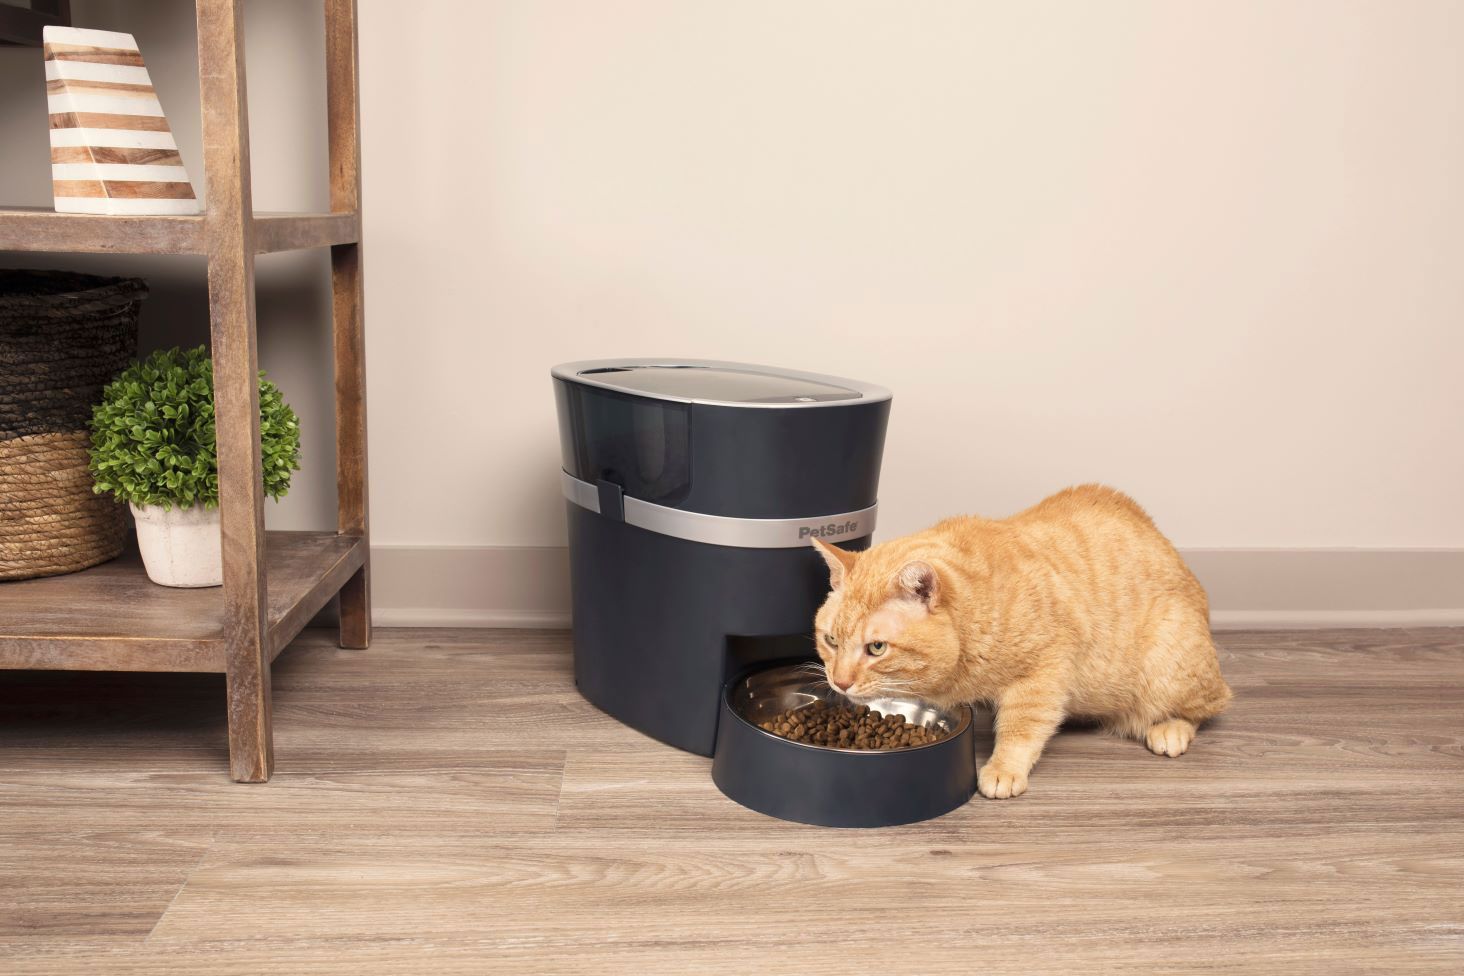 cat and automatic feeder